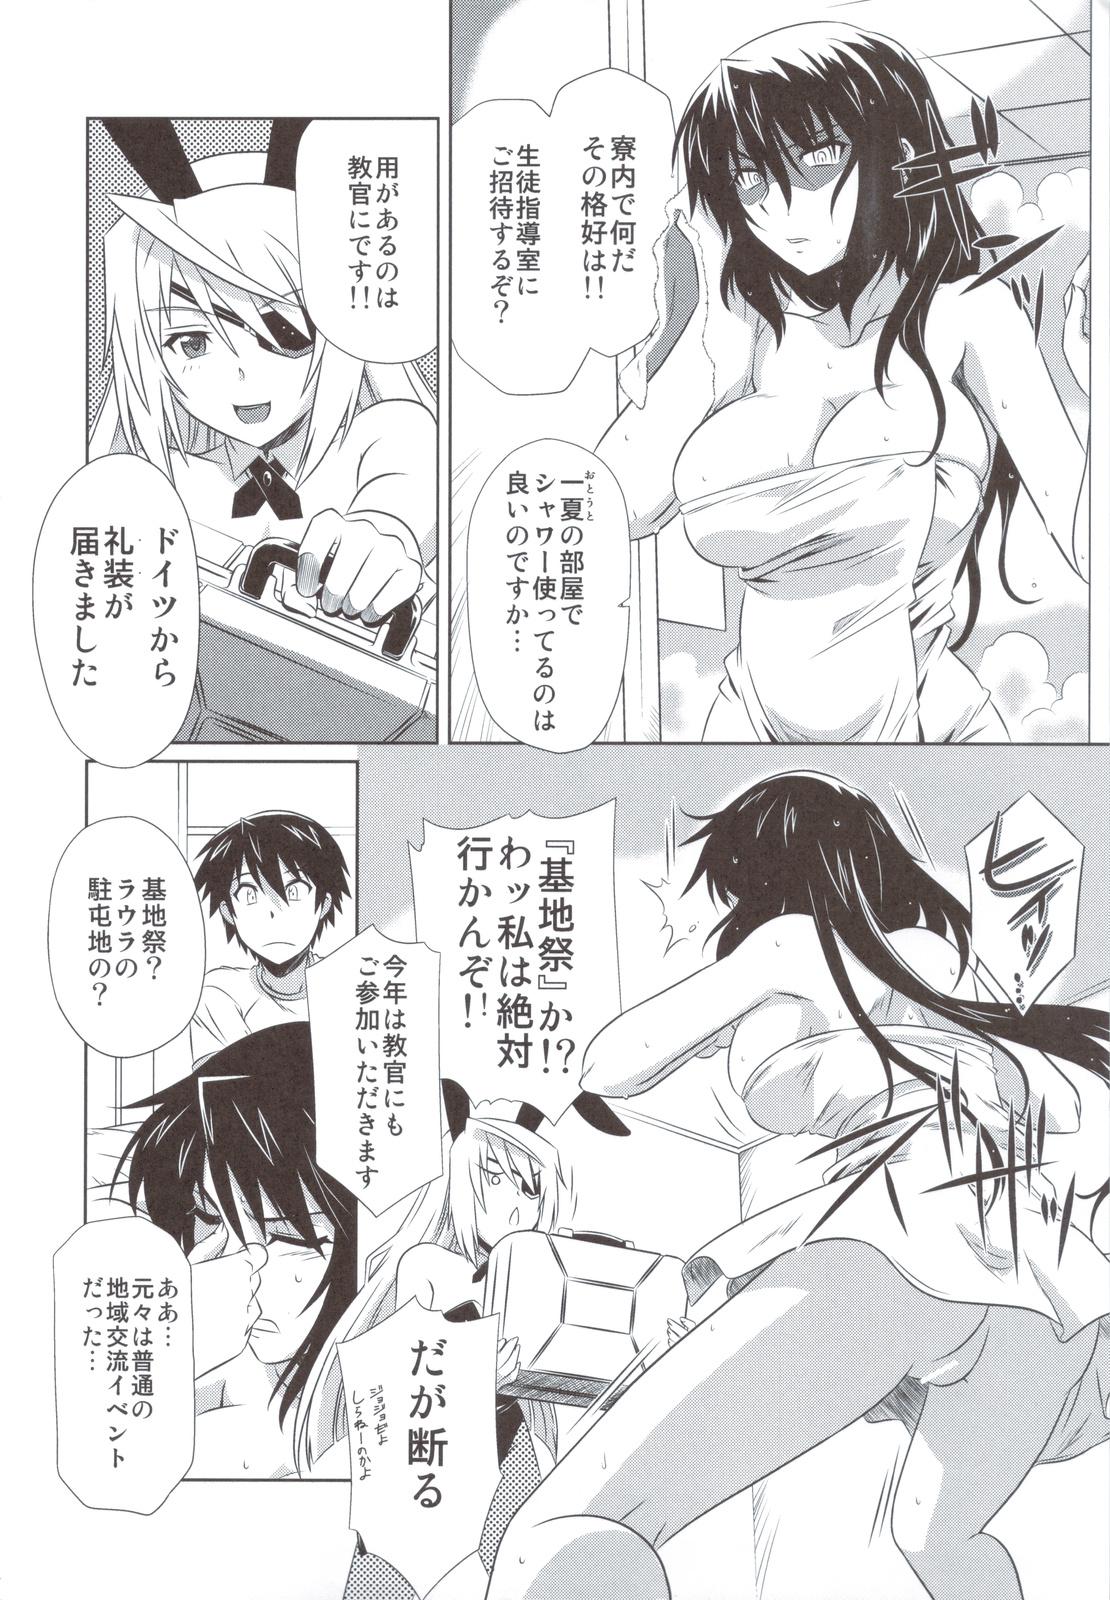 Cougar is Incest Strategy 3 - Infinite stratos Transvestite - Page 3